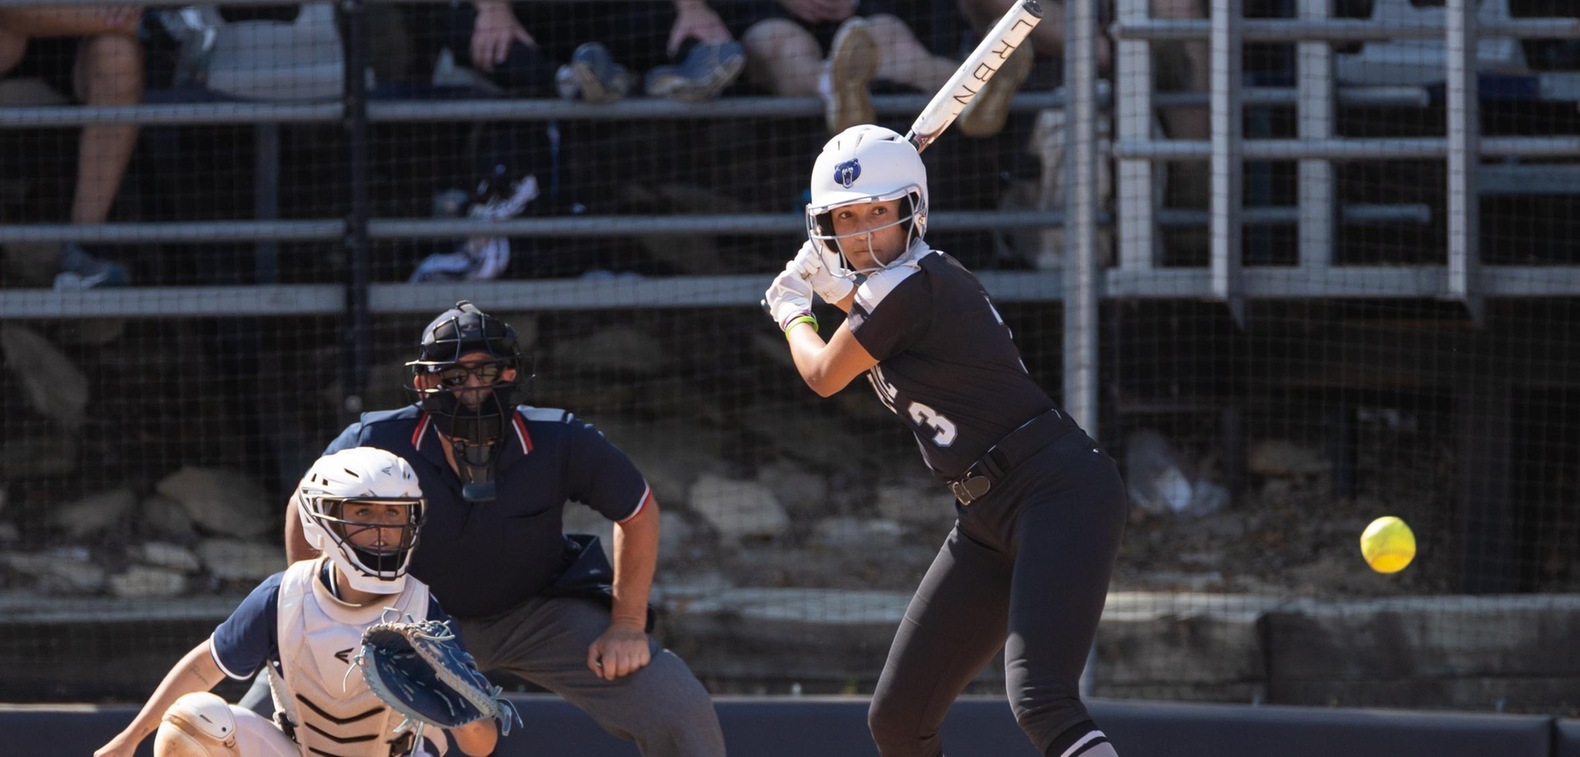 Breanne McMurtry went 2-for-3 with a home run and two RBIs to lead the BU offense.